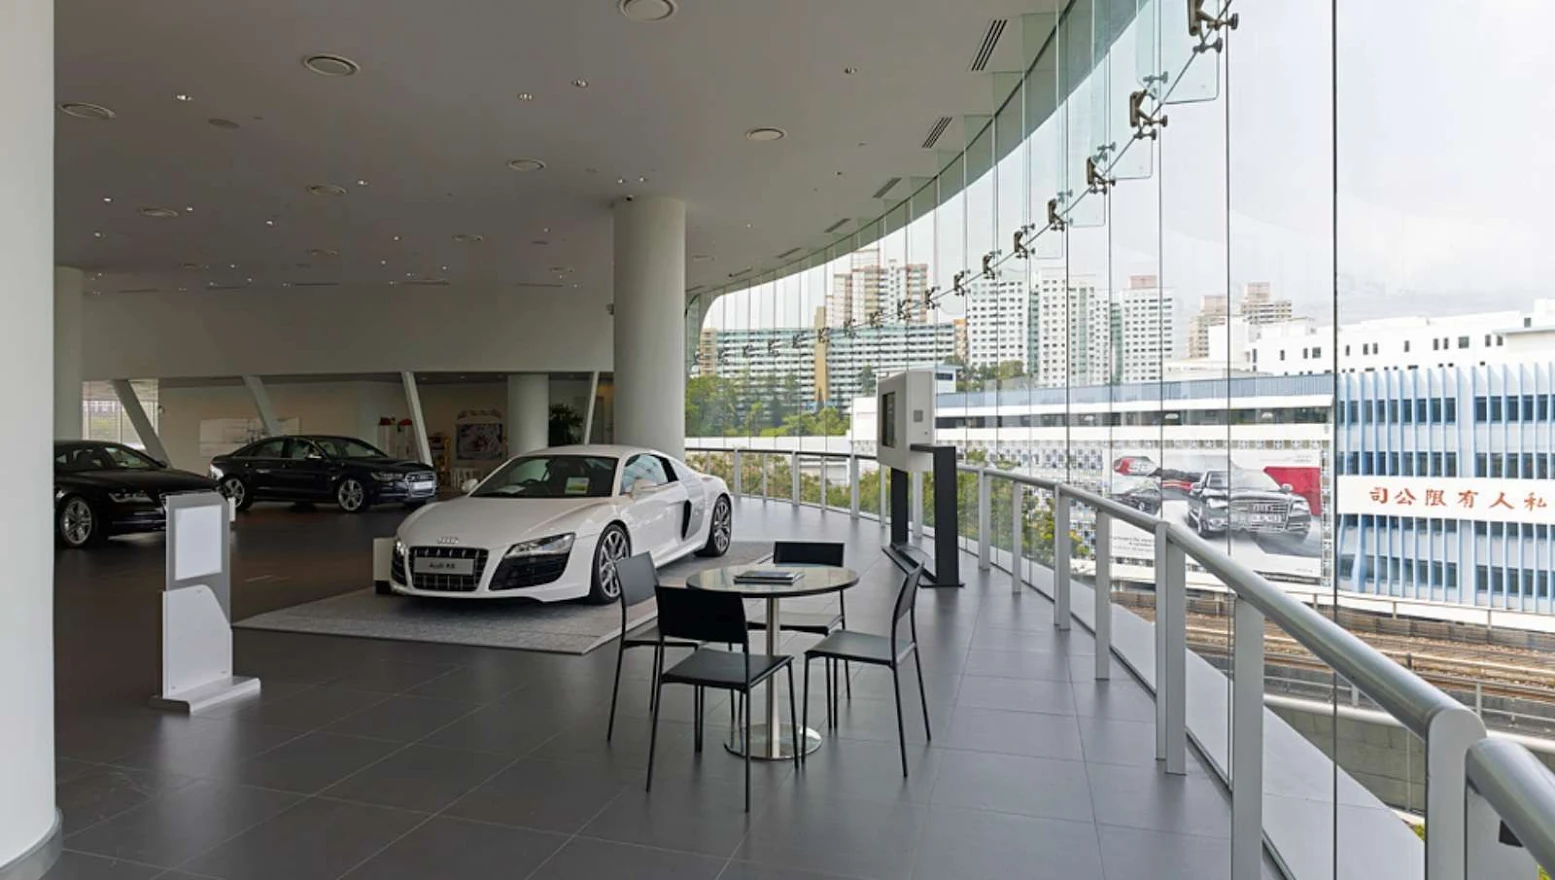 10-Audi-Centre-Singapore-by-ONG&ONG